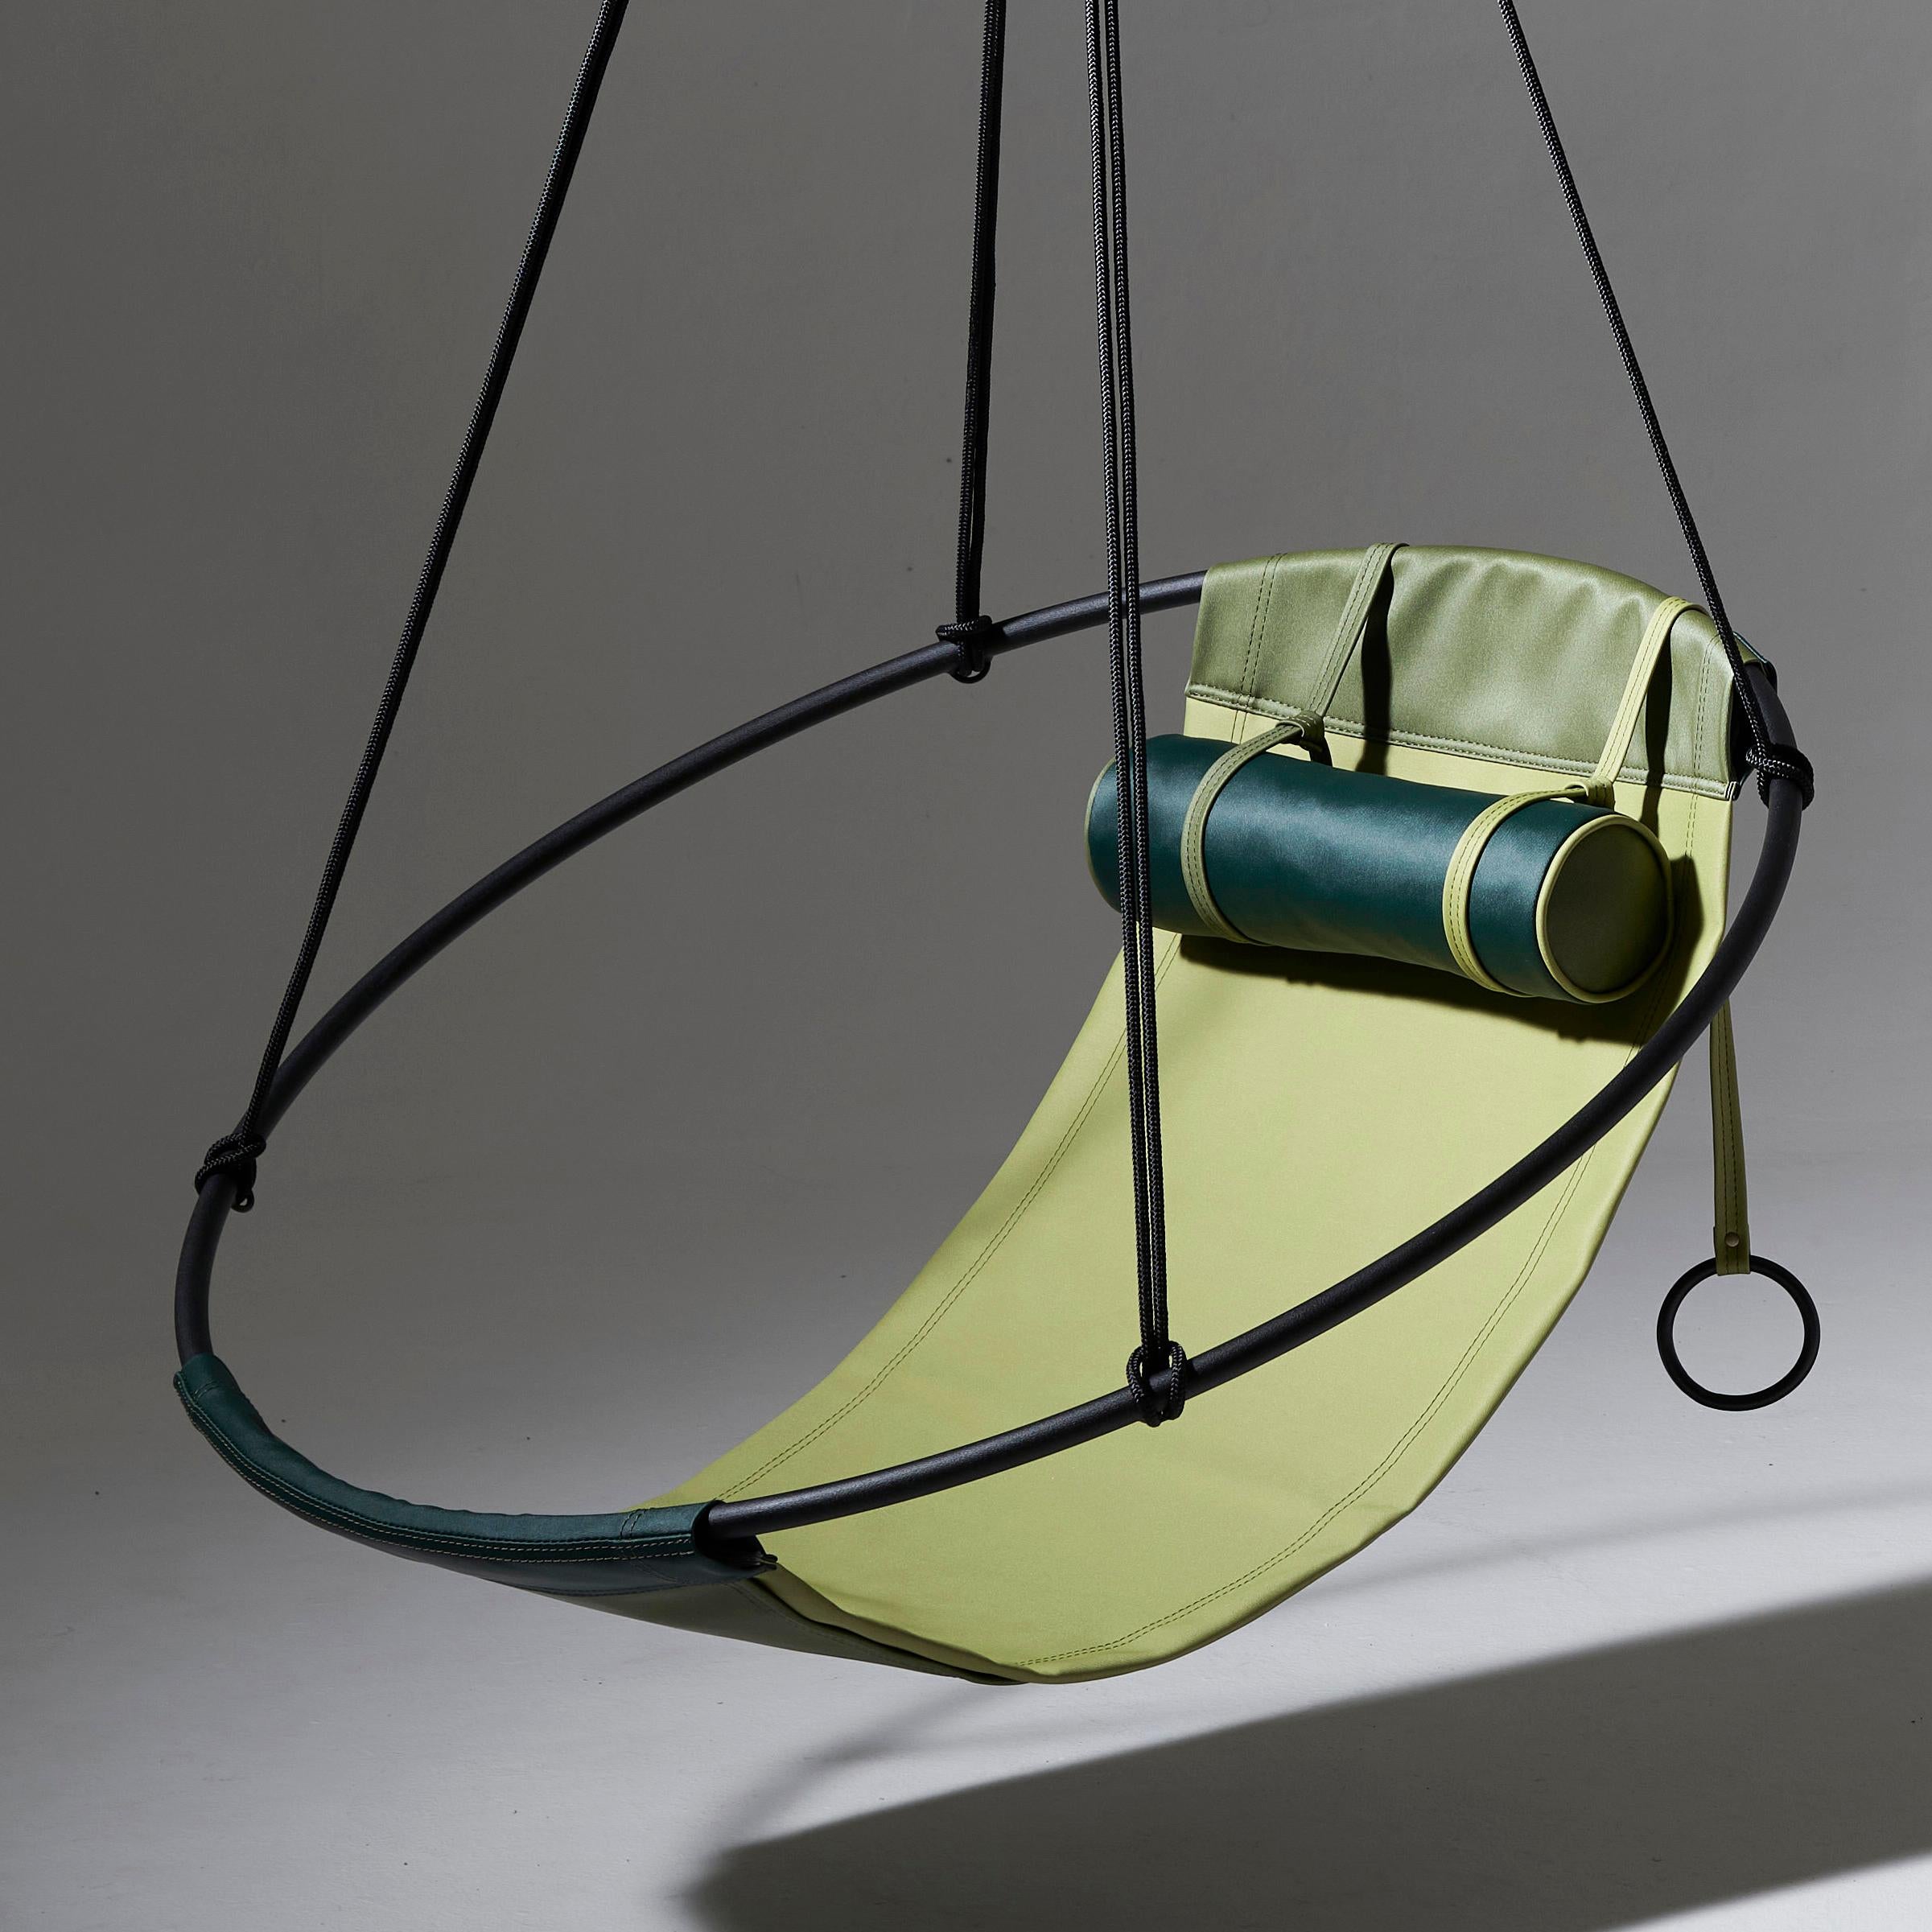 Our outdoor sling hanging chair is crafted with Spradling Silvertex material – a highly sustainable environmentally-friendly vegan material.
The Slings can be ordered as a single but also works together as a pair which is slightly different from